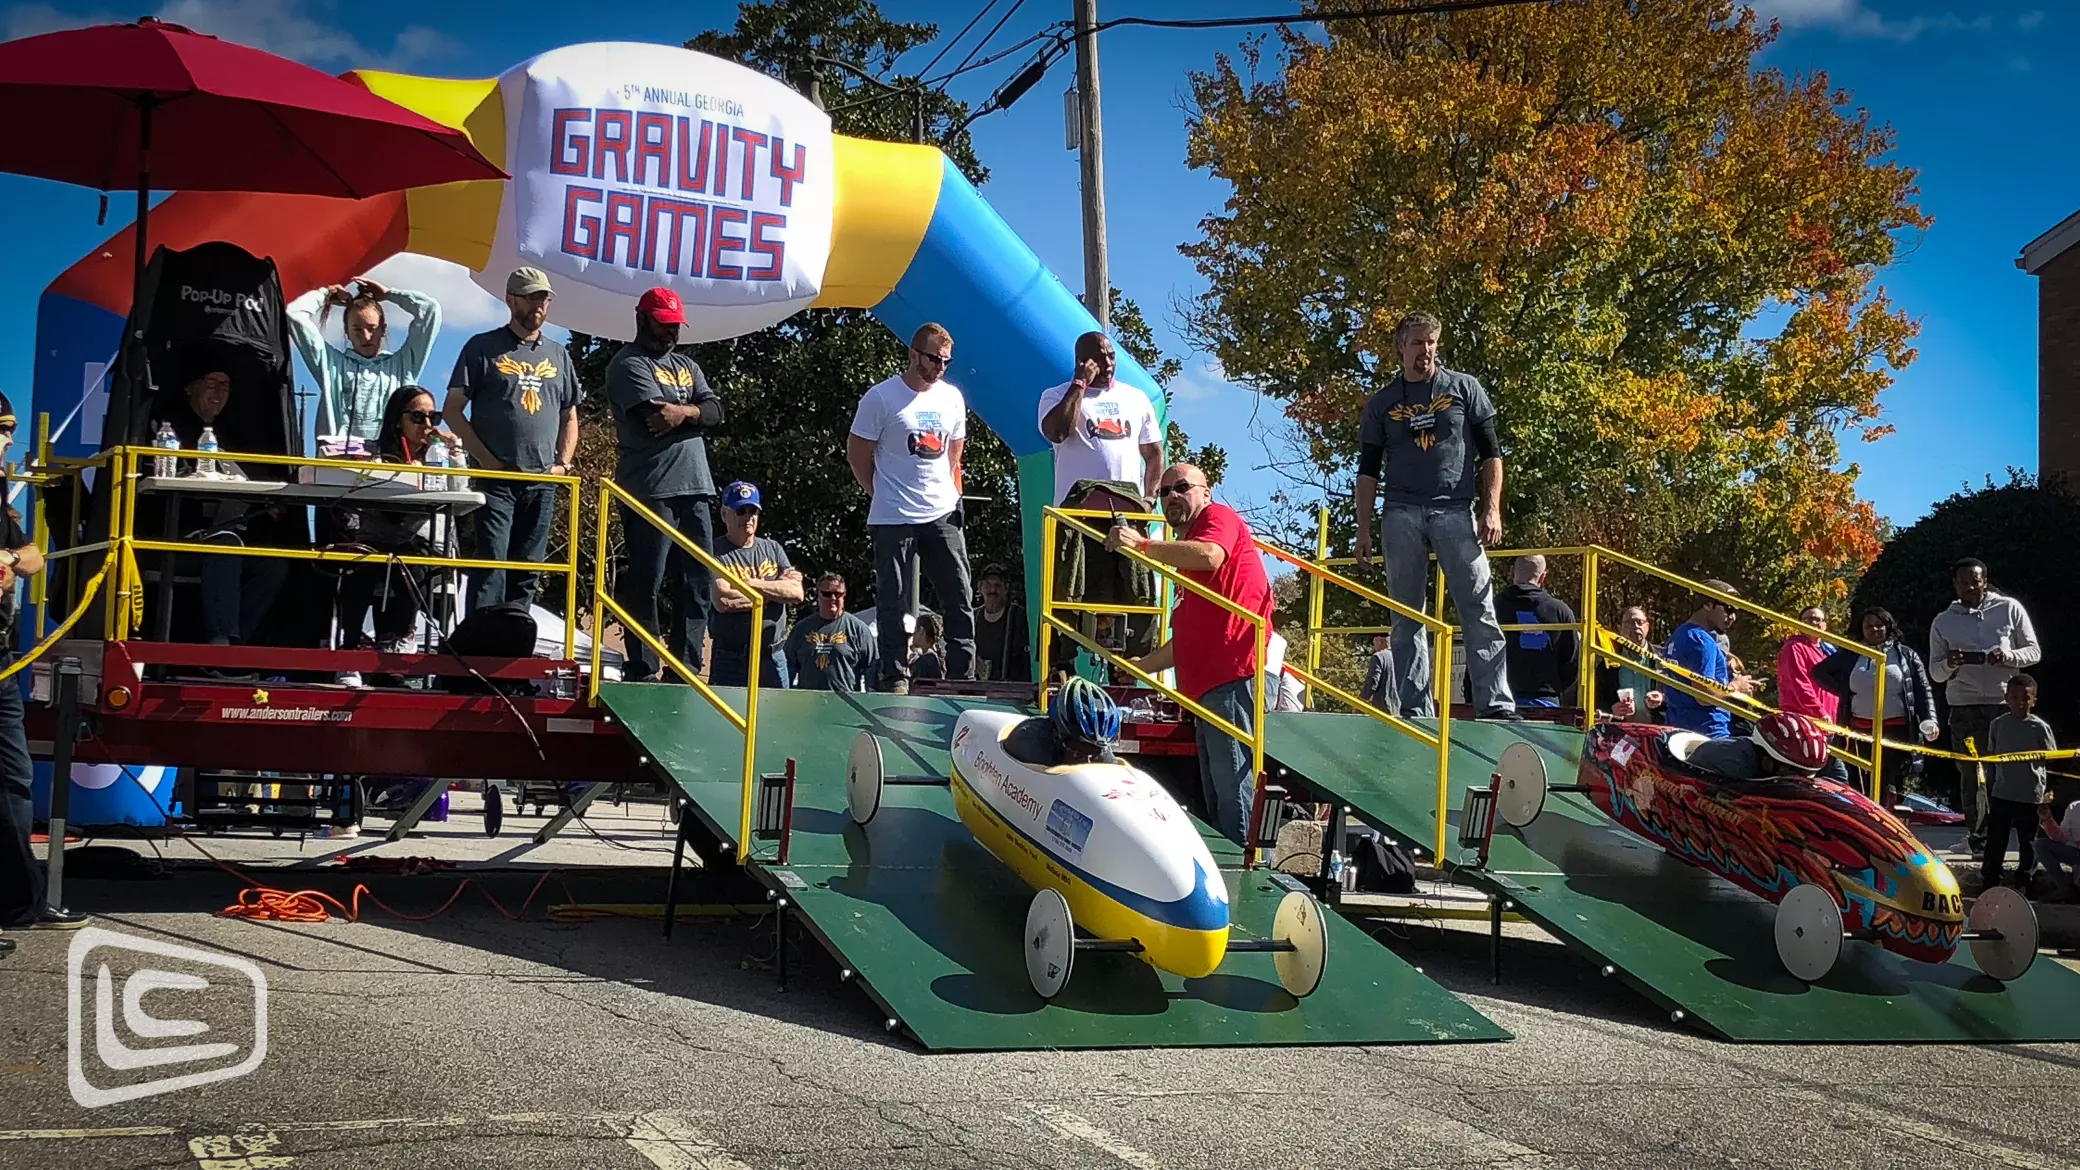 Custom Inflatable Starting Arch with Racers at the 5th Annual Georgia Gravity Games